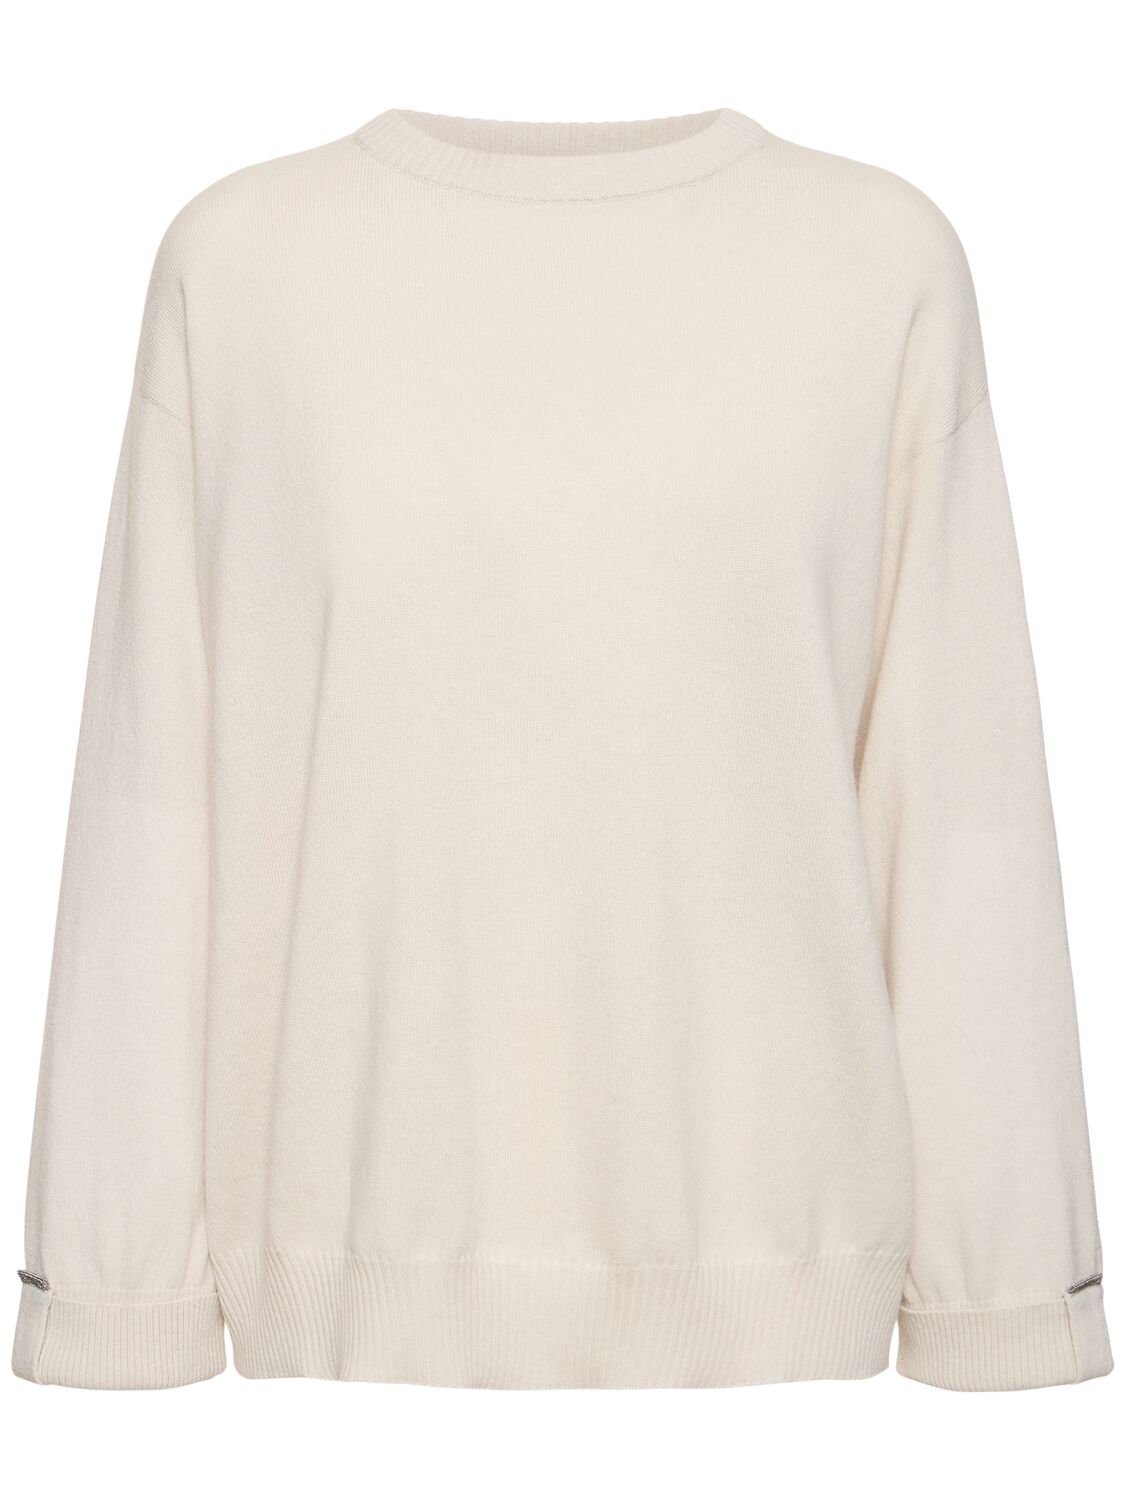 Brunello Cucinelli Embellished Cashmere Knit Sweater In Ice White